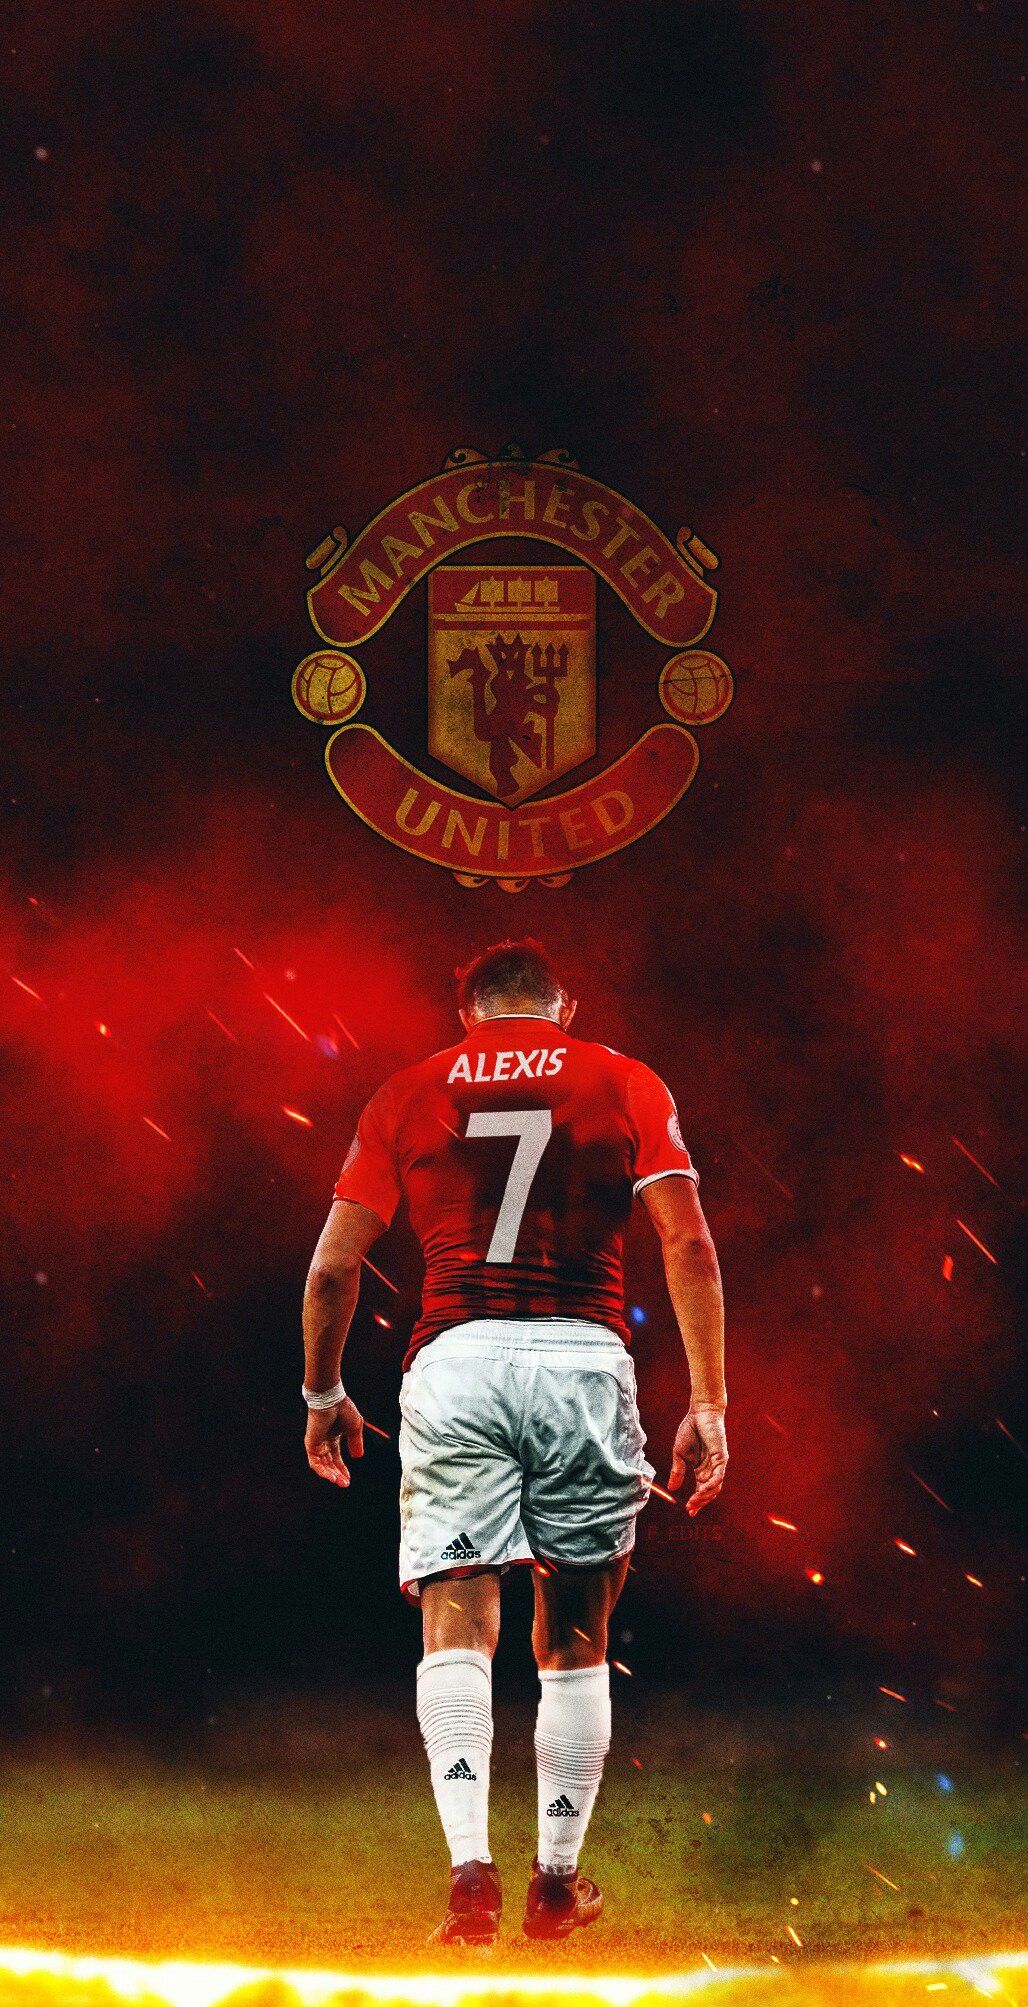 Wele To Manchester United Alexis Sanchez Mufc